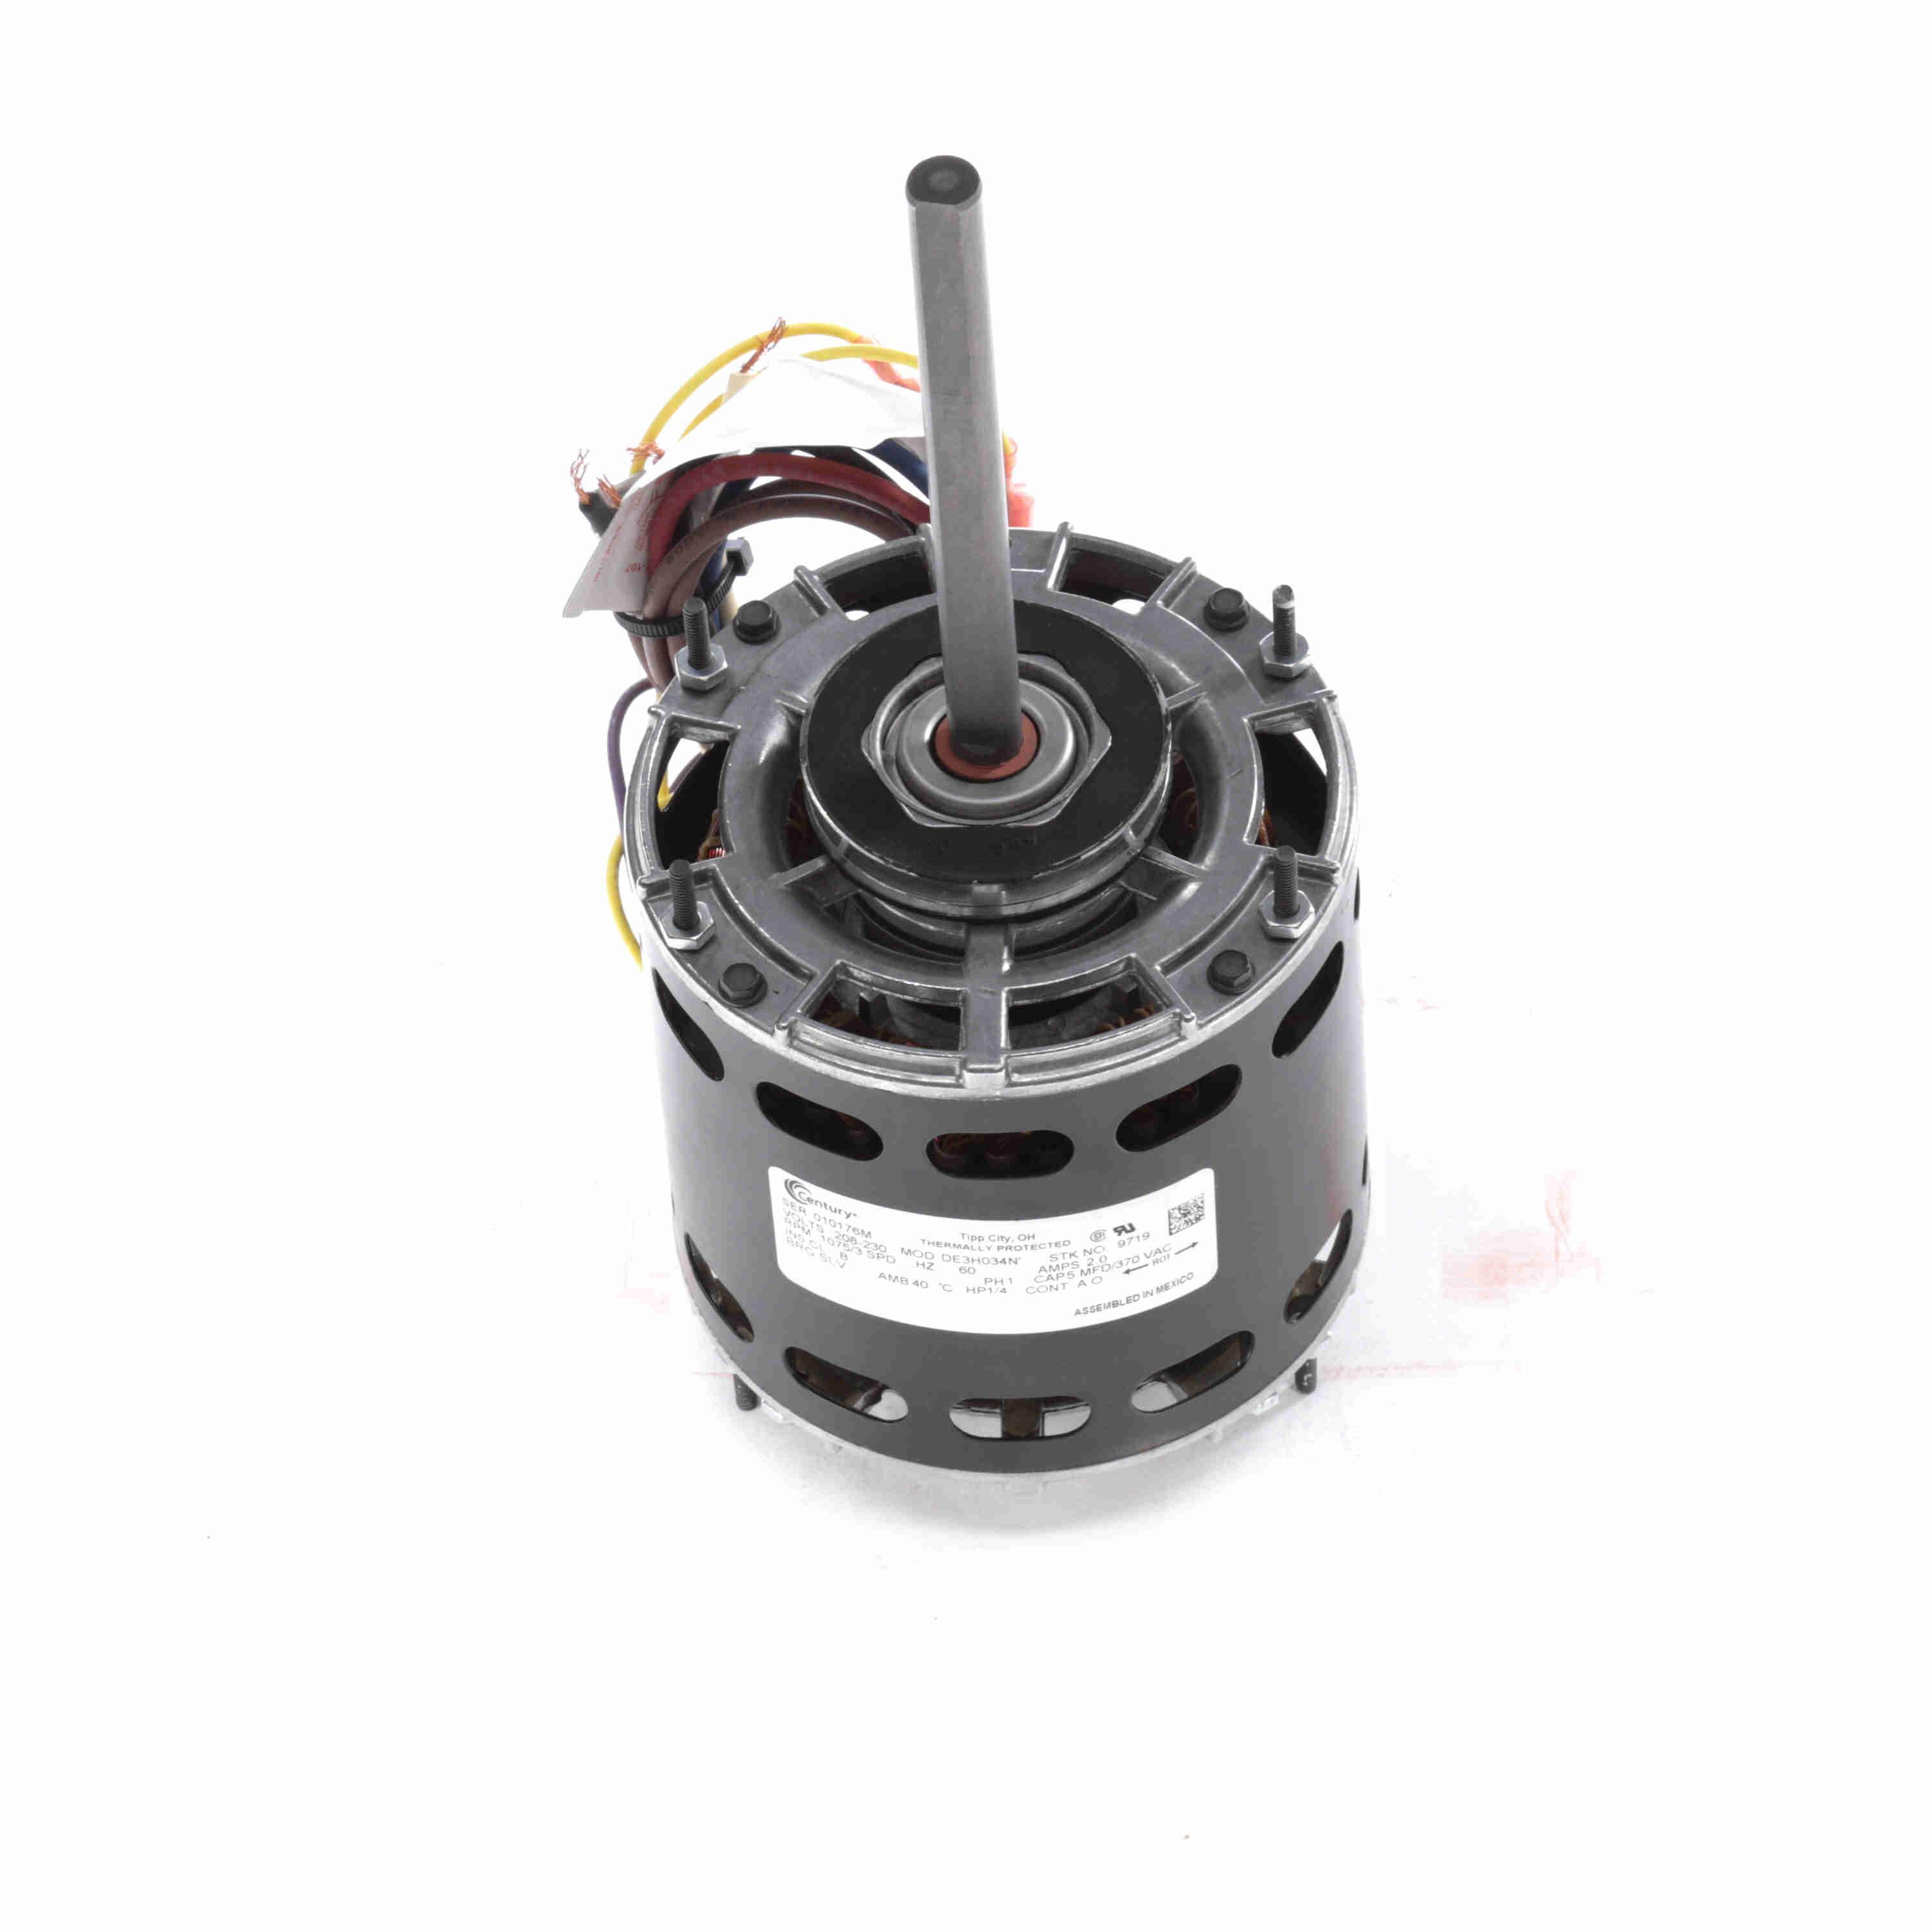 Century® 9719 6-Pole HVAC/R Motor, Open Air Over Enclosure, 1/4 hp, 208 to 230 V, 60 Hz, 1 Phase, 42Y Frame, 1075 rpm Speed, Resilient Ring Mount